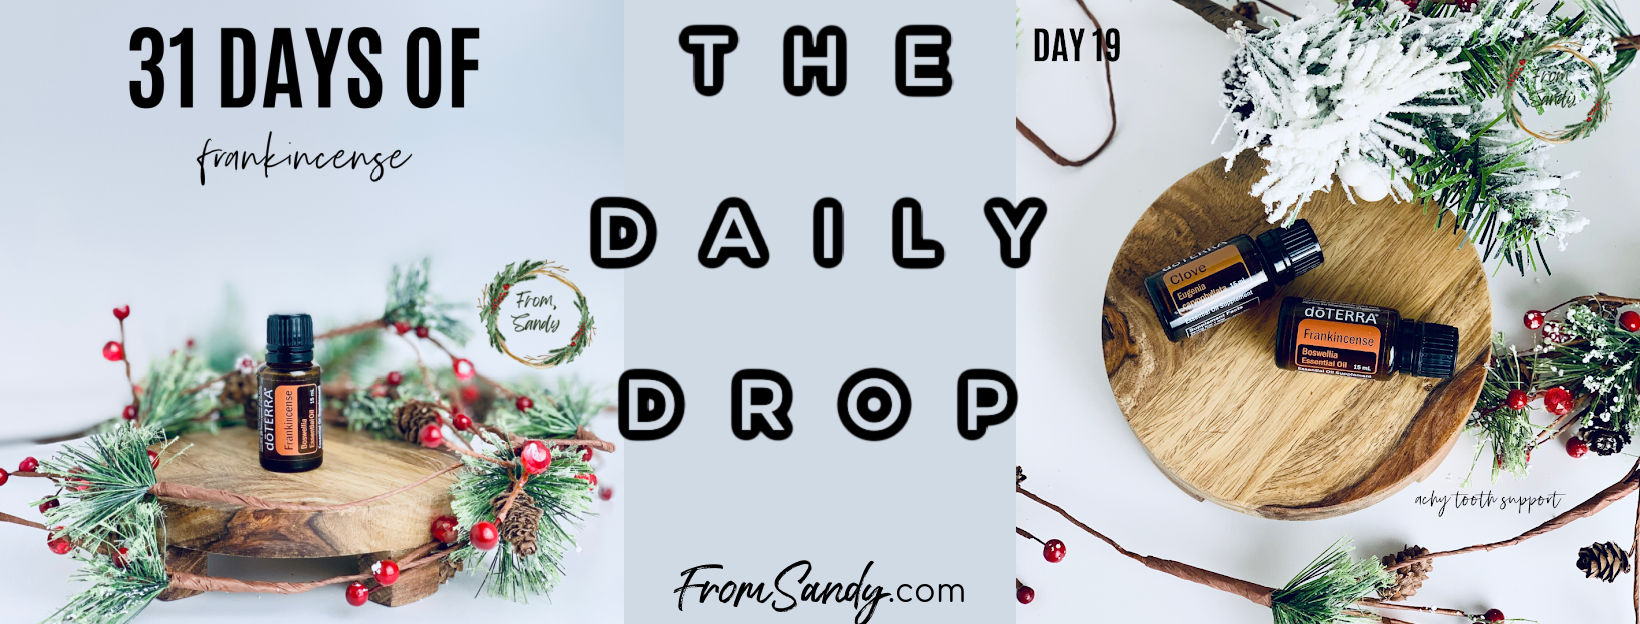 Achy Tooth Blend (31 Days of Frankincense: Day 19), From Sandy